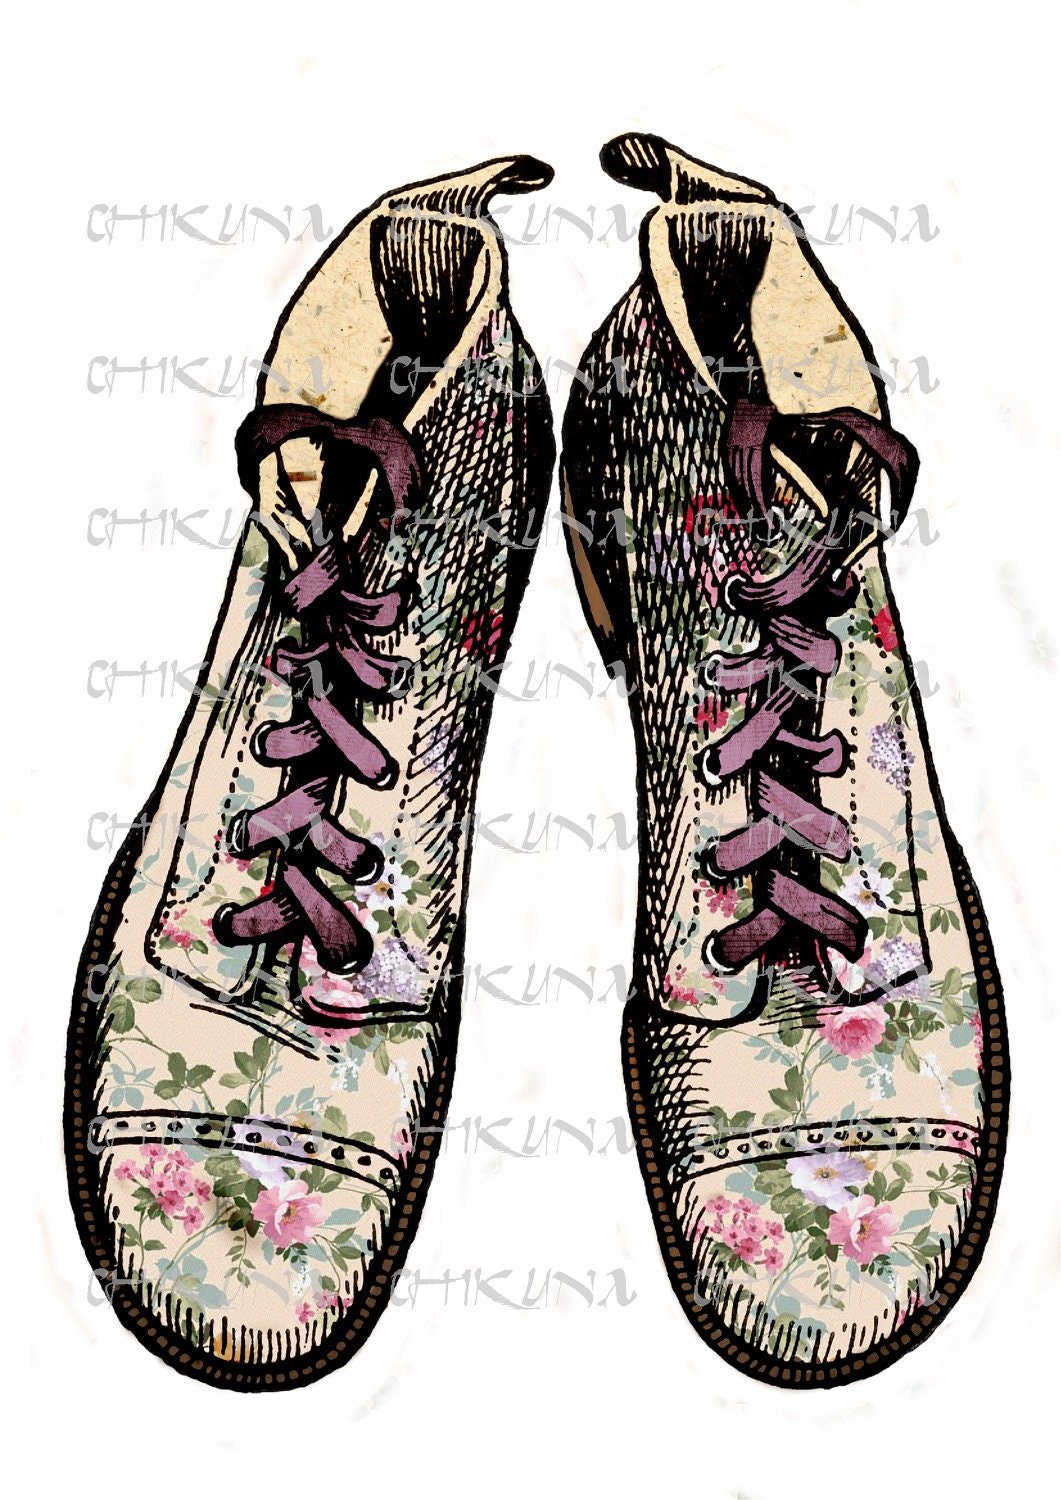 080 - Vintage Romance Village Shoes  - Download and Print - Transfer To Pillows, T-Shirt, Burlap, Tote, Bag. Print on Canvas, Paper - ChikUna